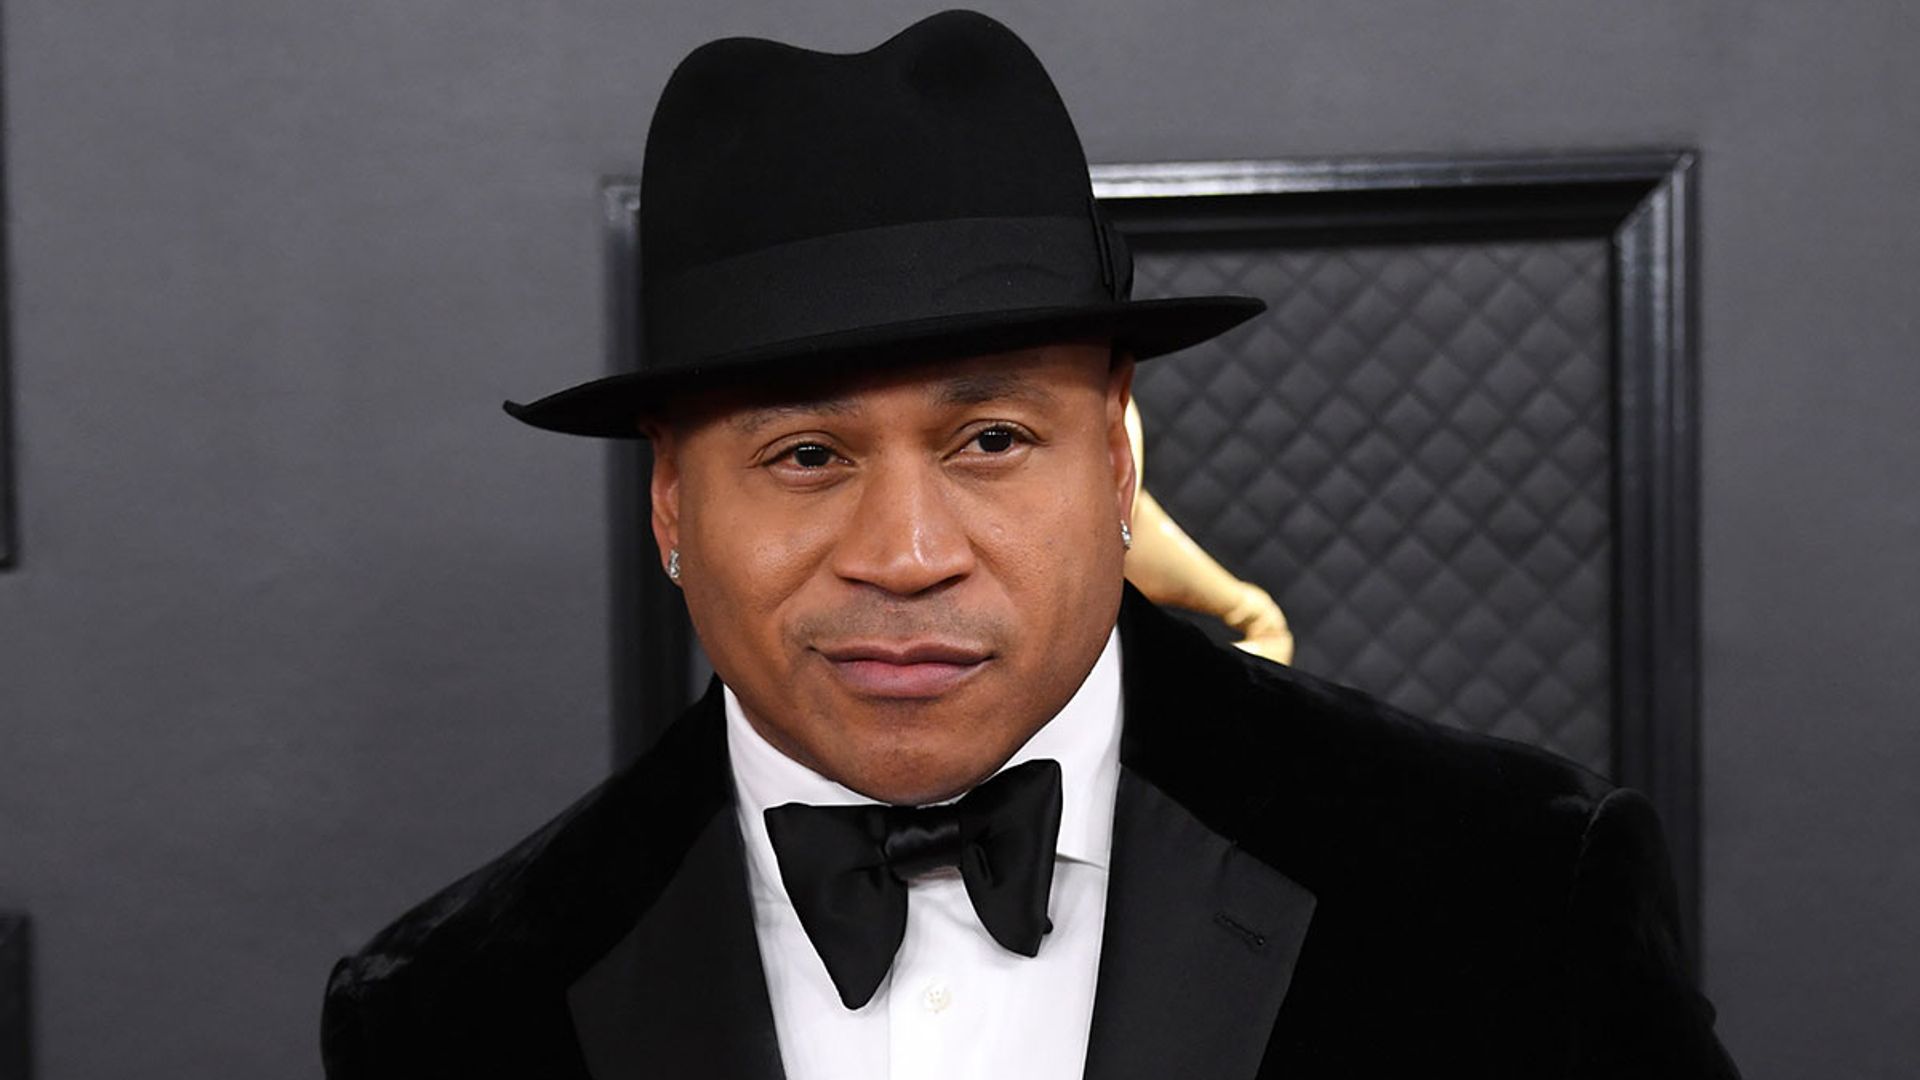 What is NCIS: Los Angeles star LL Cool J's net worth?